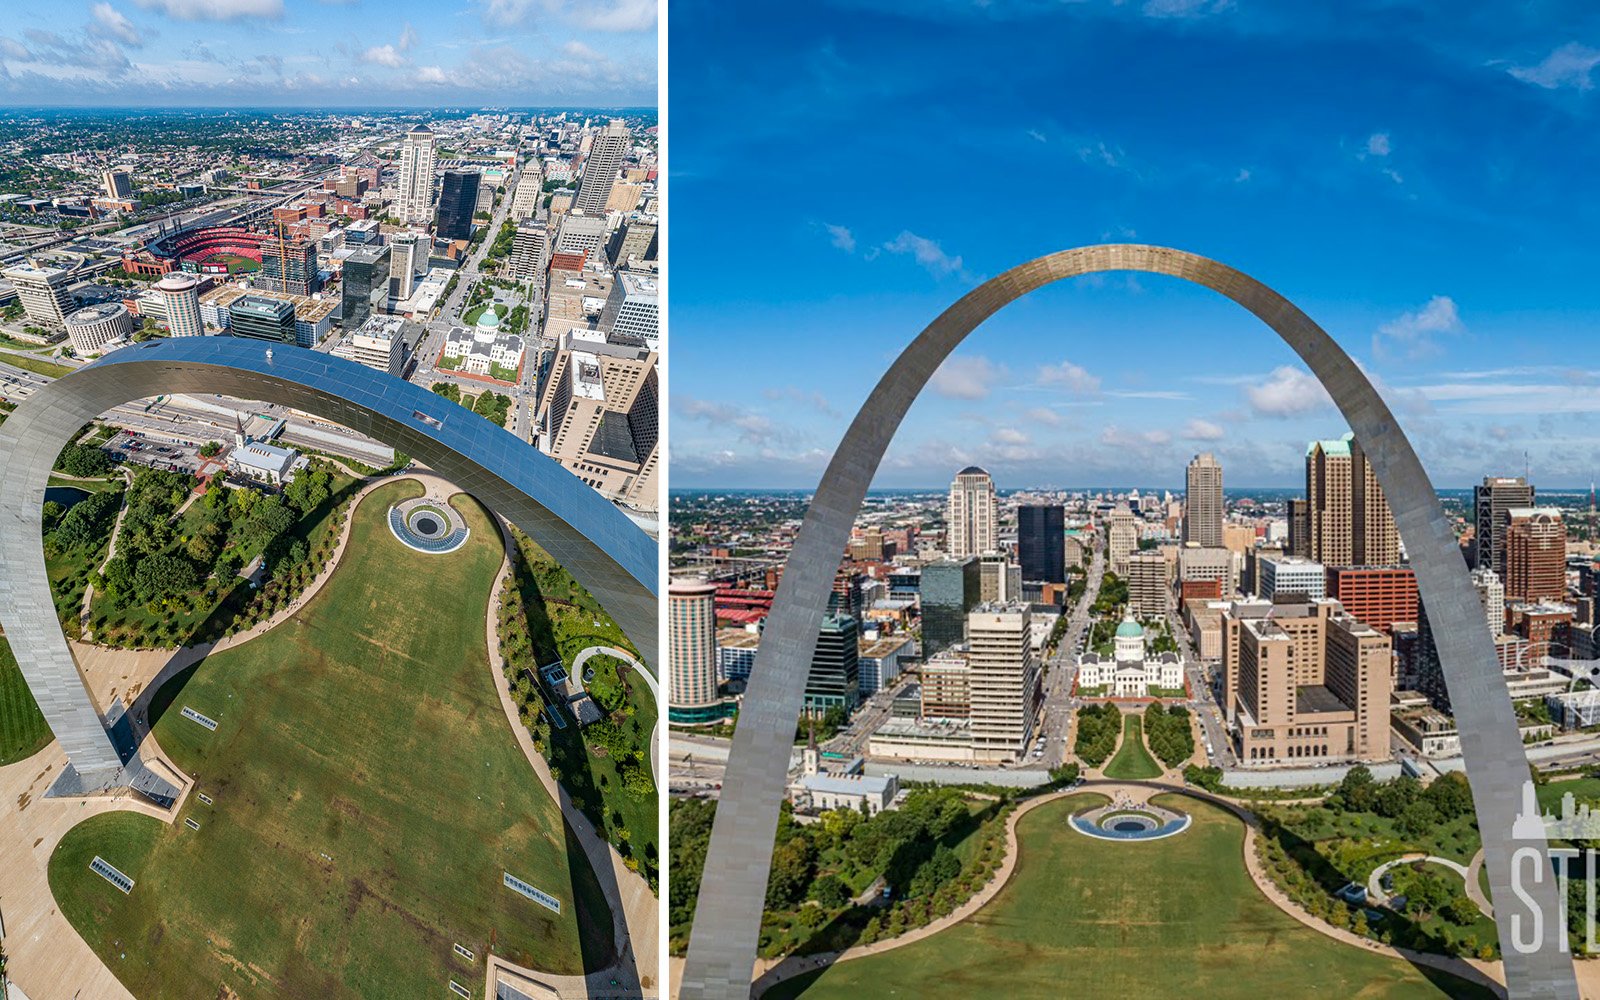 How I Got Permission to Shoot the St. Louis Gateway Arch from Above